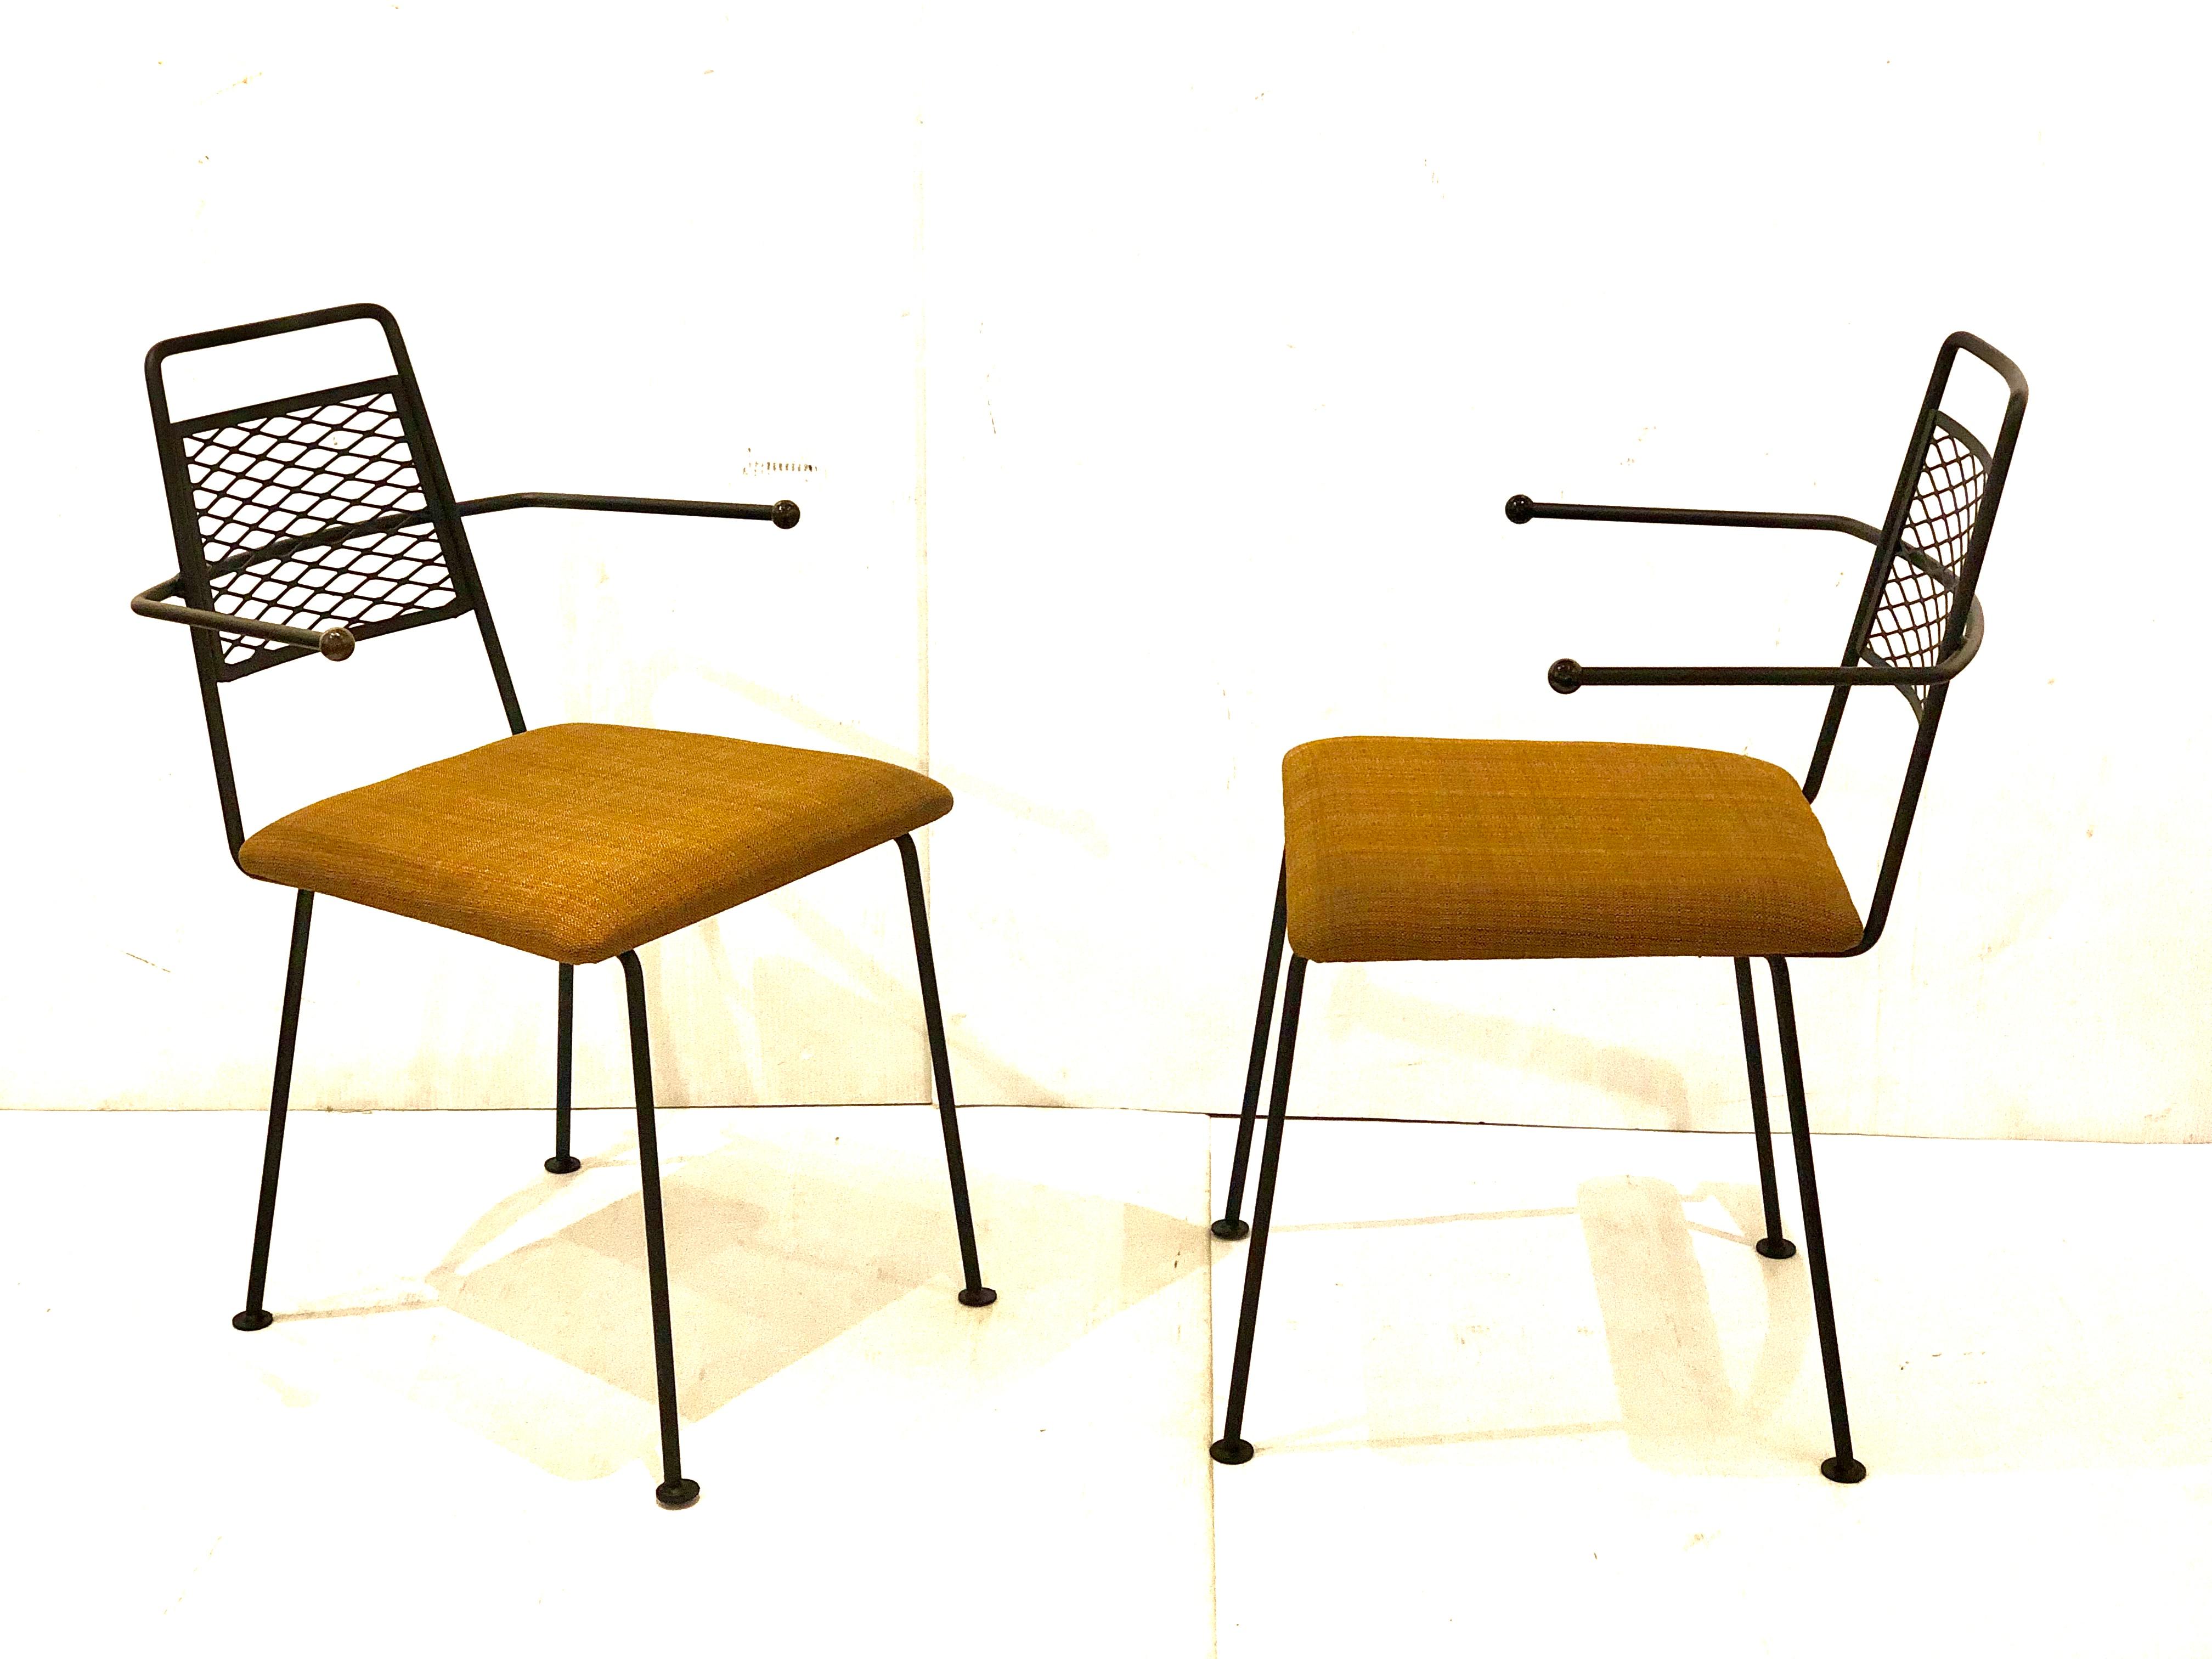 Nice pair solid wrought iron, with freshly upholstered seat pads in brown simple elegant design, hard to find circa 1950s Atomic age look. With ball tips accents at the arms ends freshly resprayed in flat black.